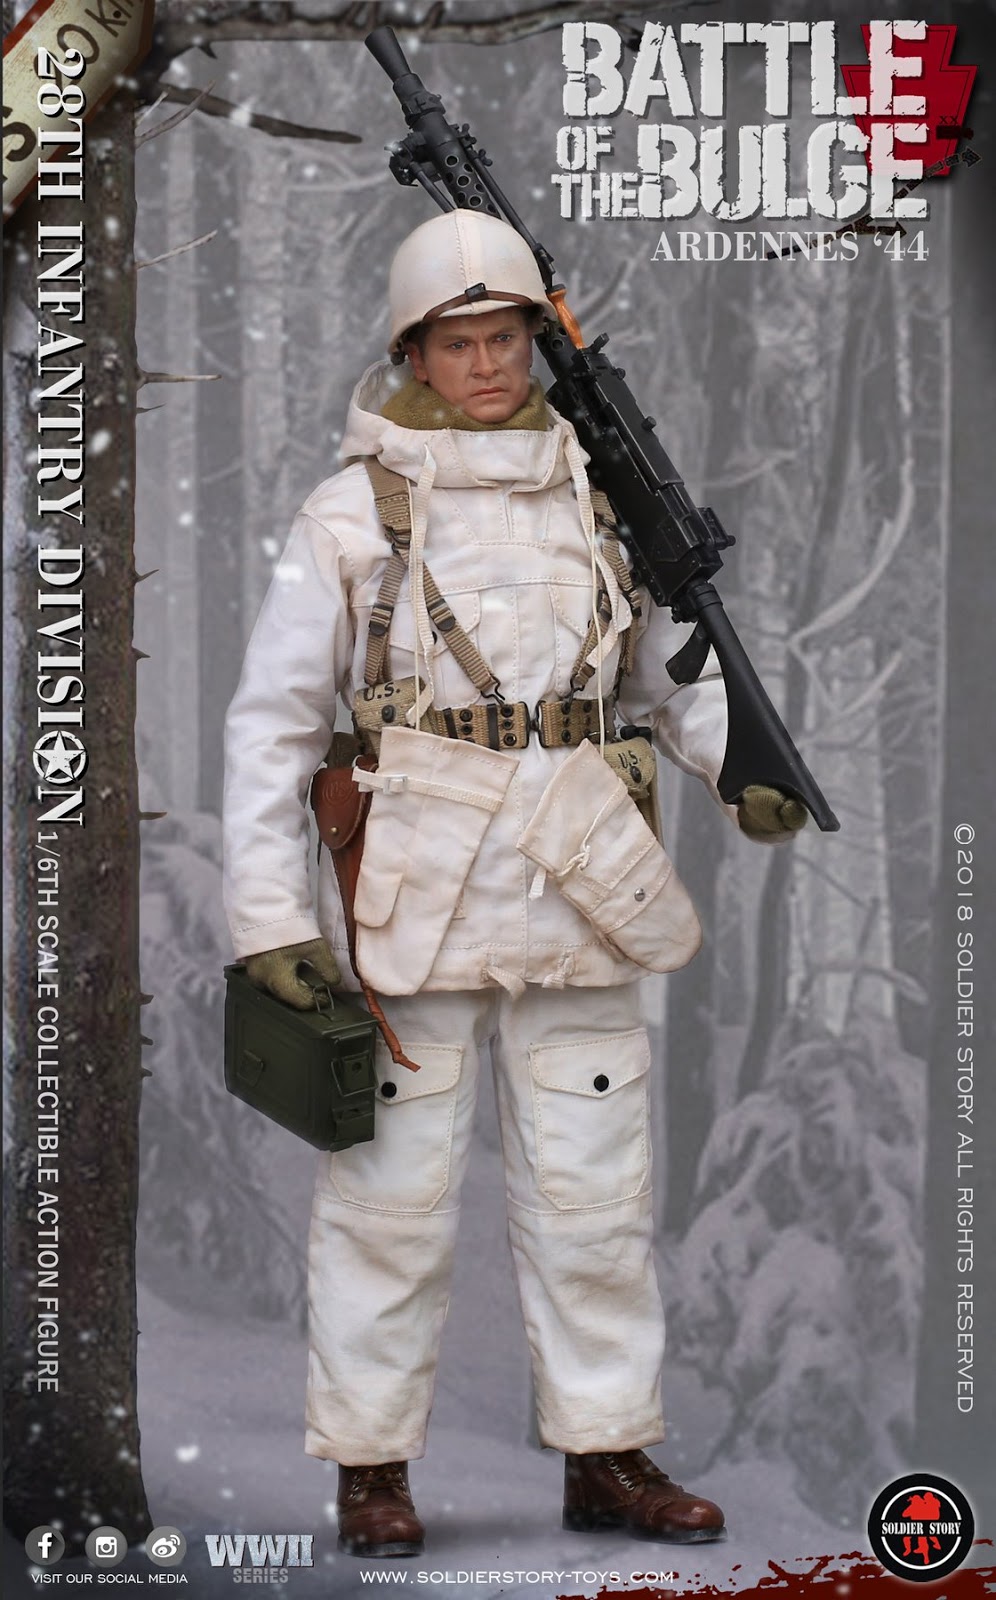 28thInfantry - NEW PRODUCT: Soldier Story: 1/6 scale U.S. Army 28th Infantry Division Ardennes 1944 Bulge010